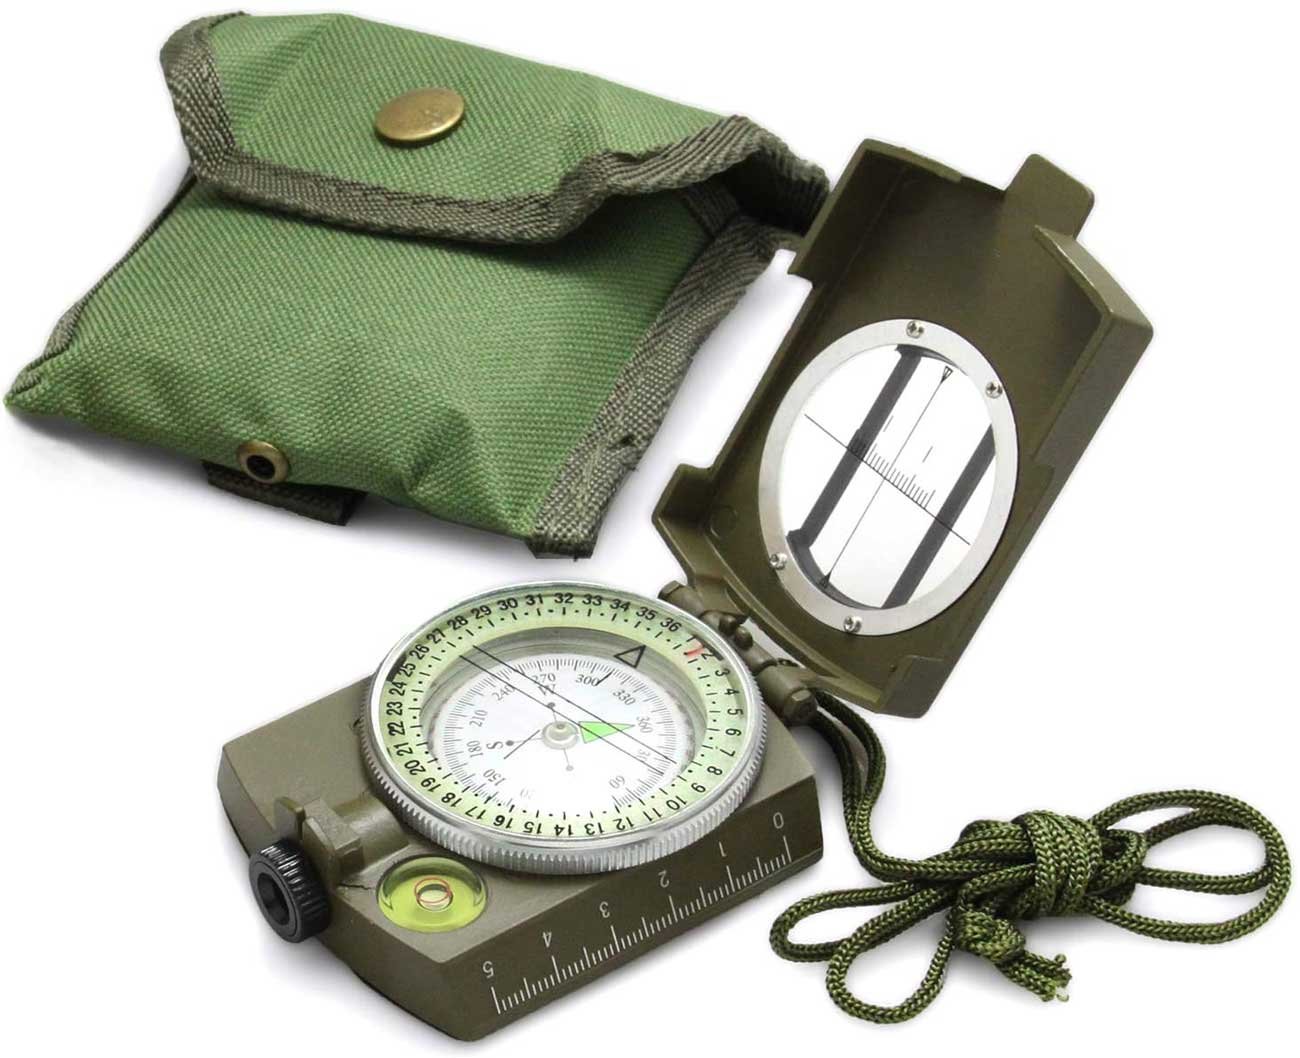 Eyeskey Tactical Survival Compass with Lanyard & Pouch